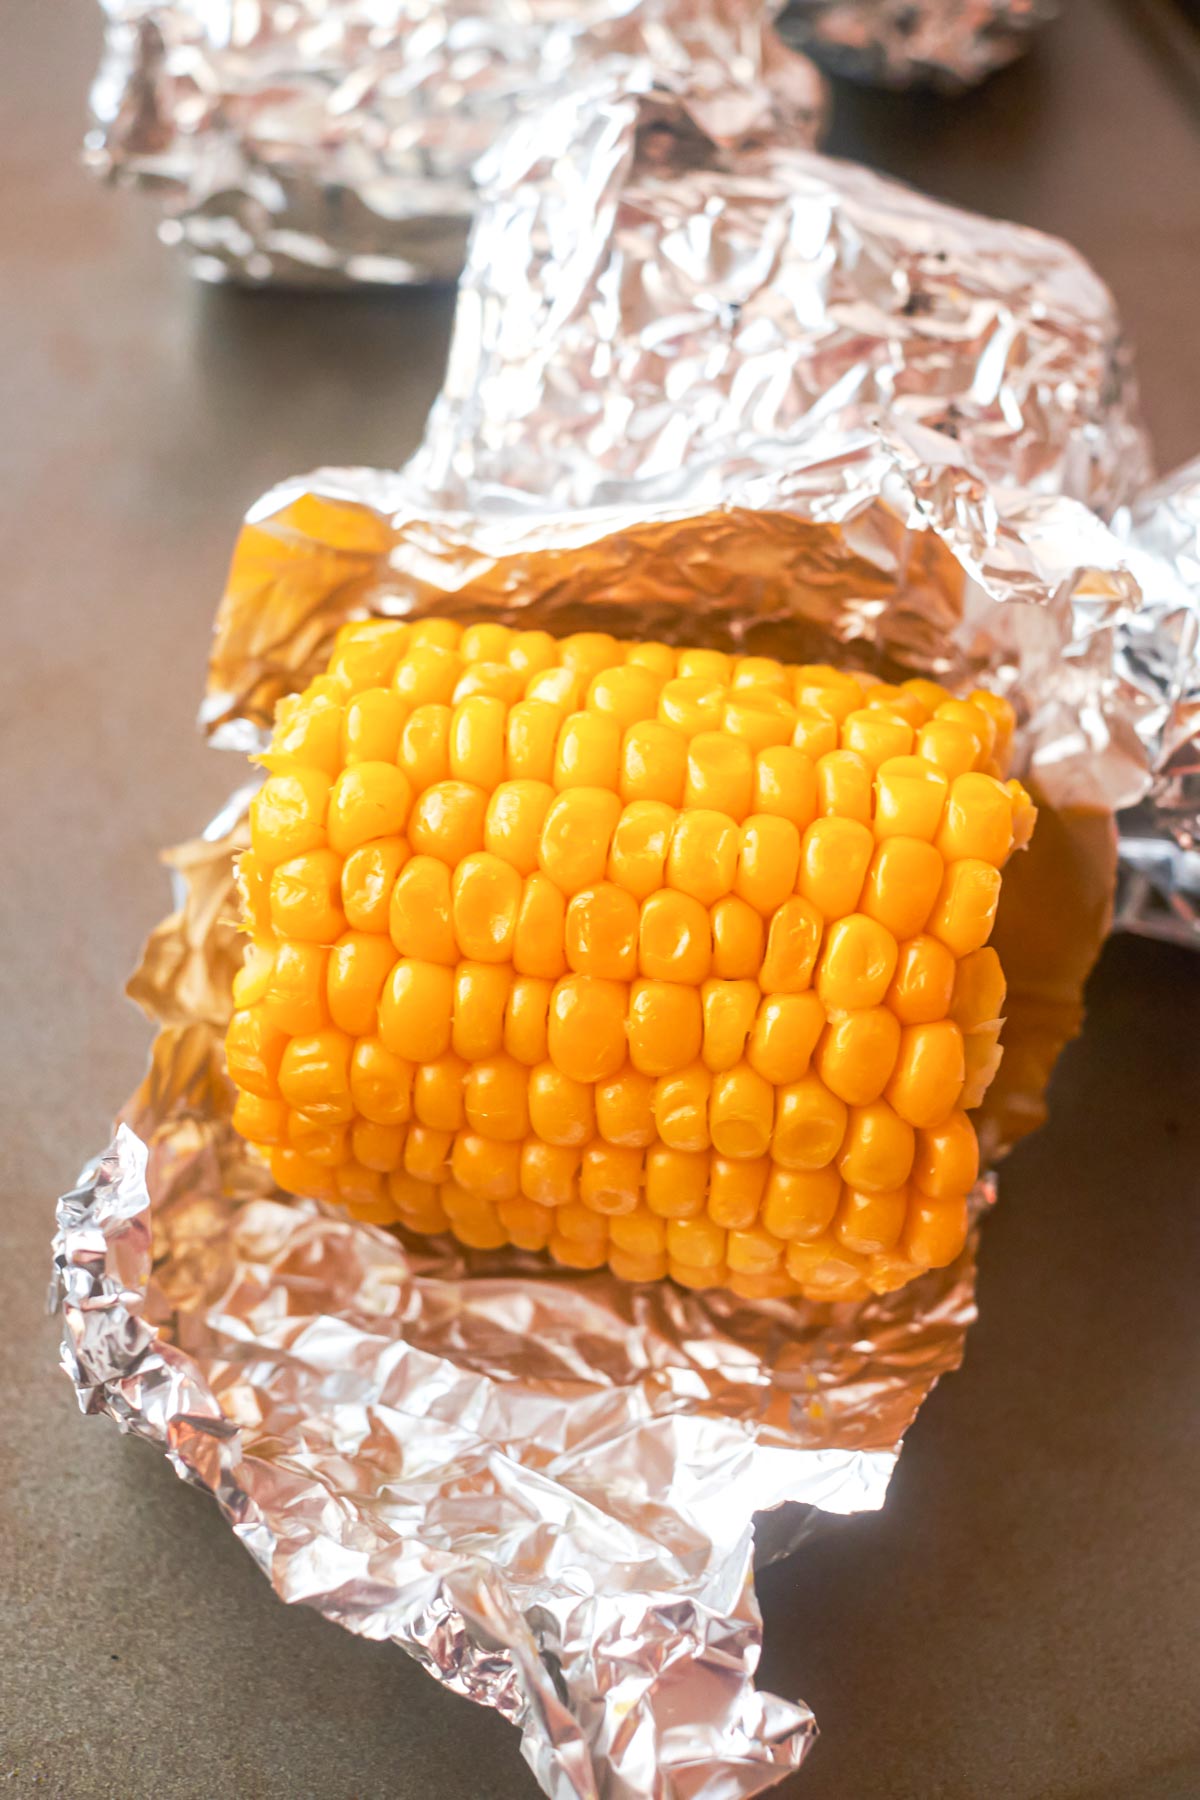 one piece of corn on the cob in the oven unwrapped ands ready to serve